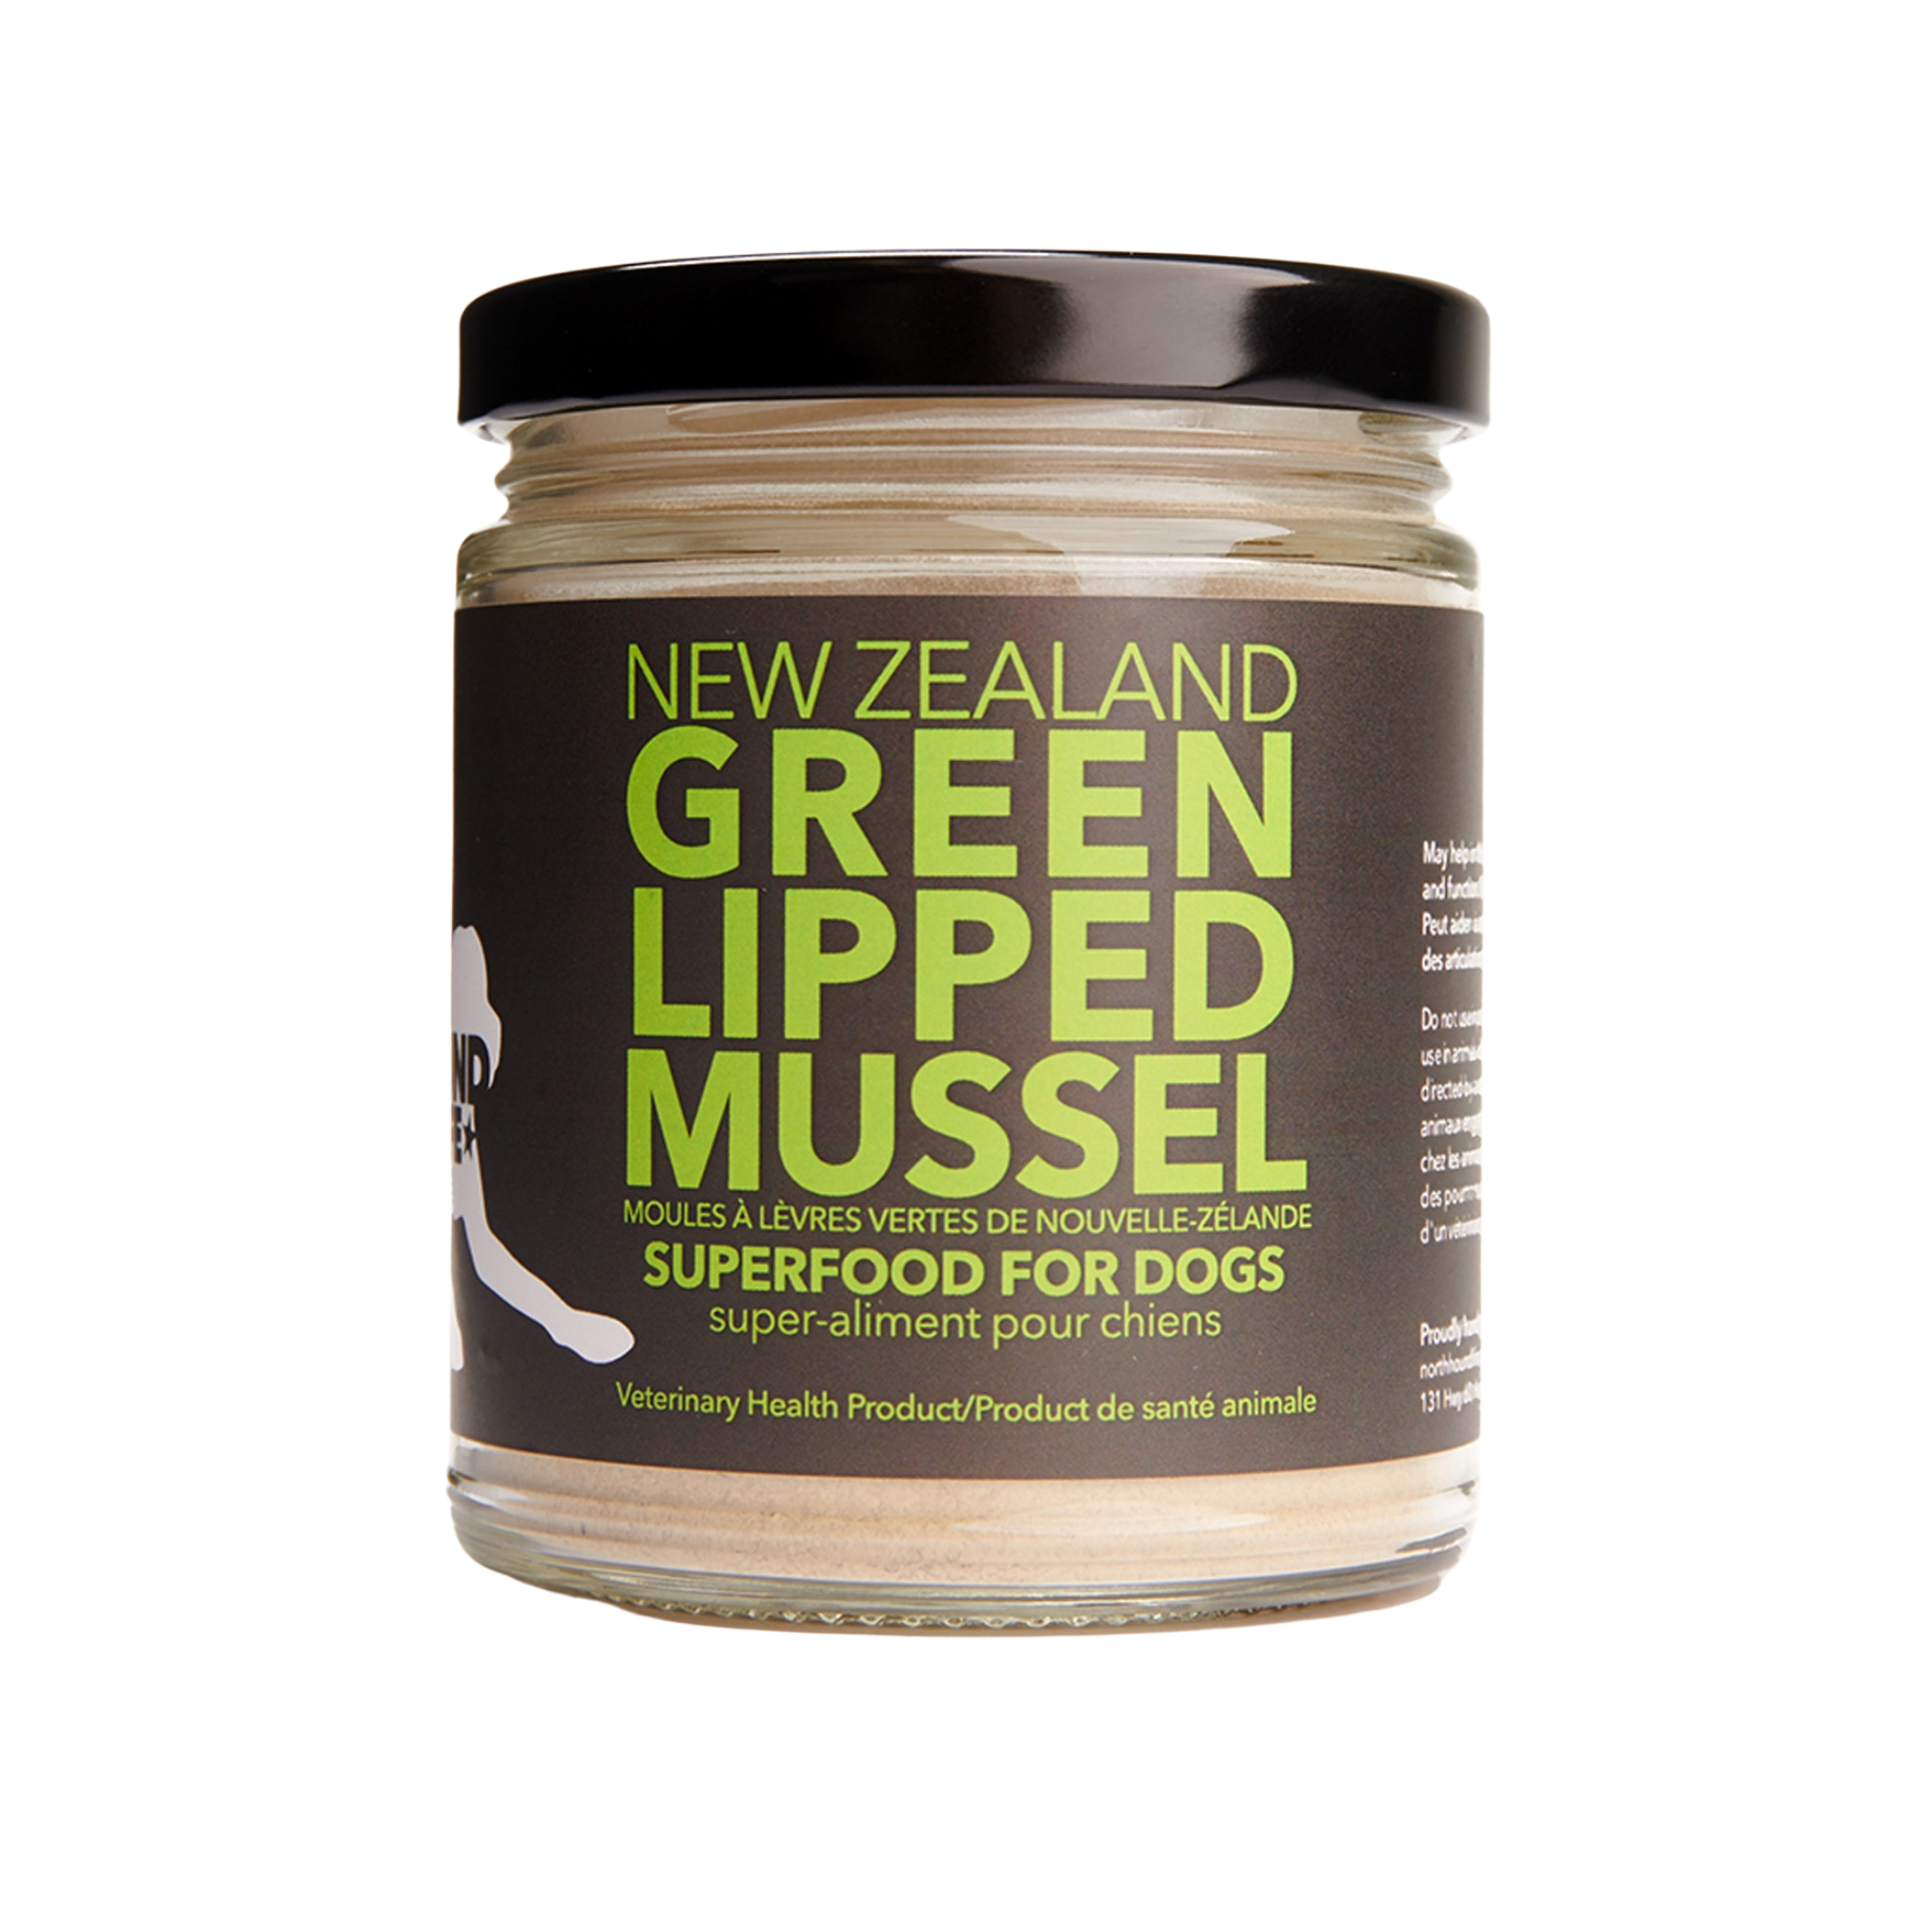 North Hound Life New Zealand Green Lipped Mussel Powder Superfood for dogs - Mutts & Co.